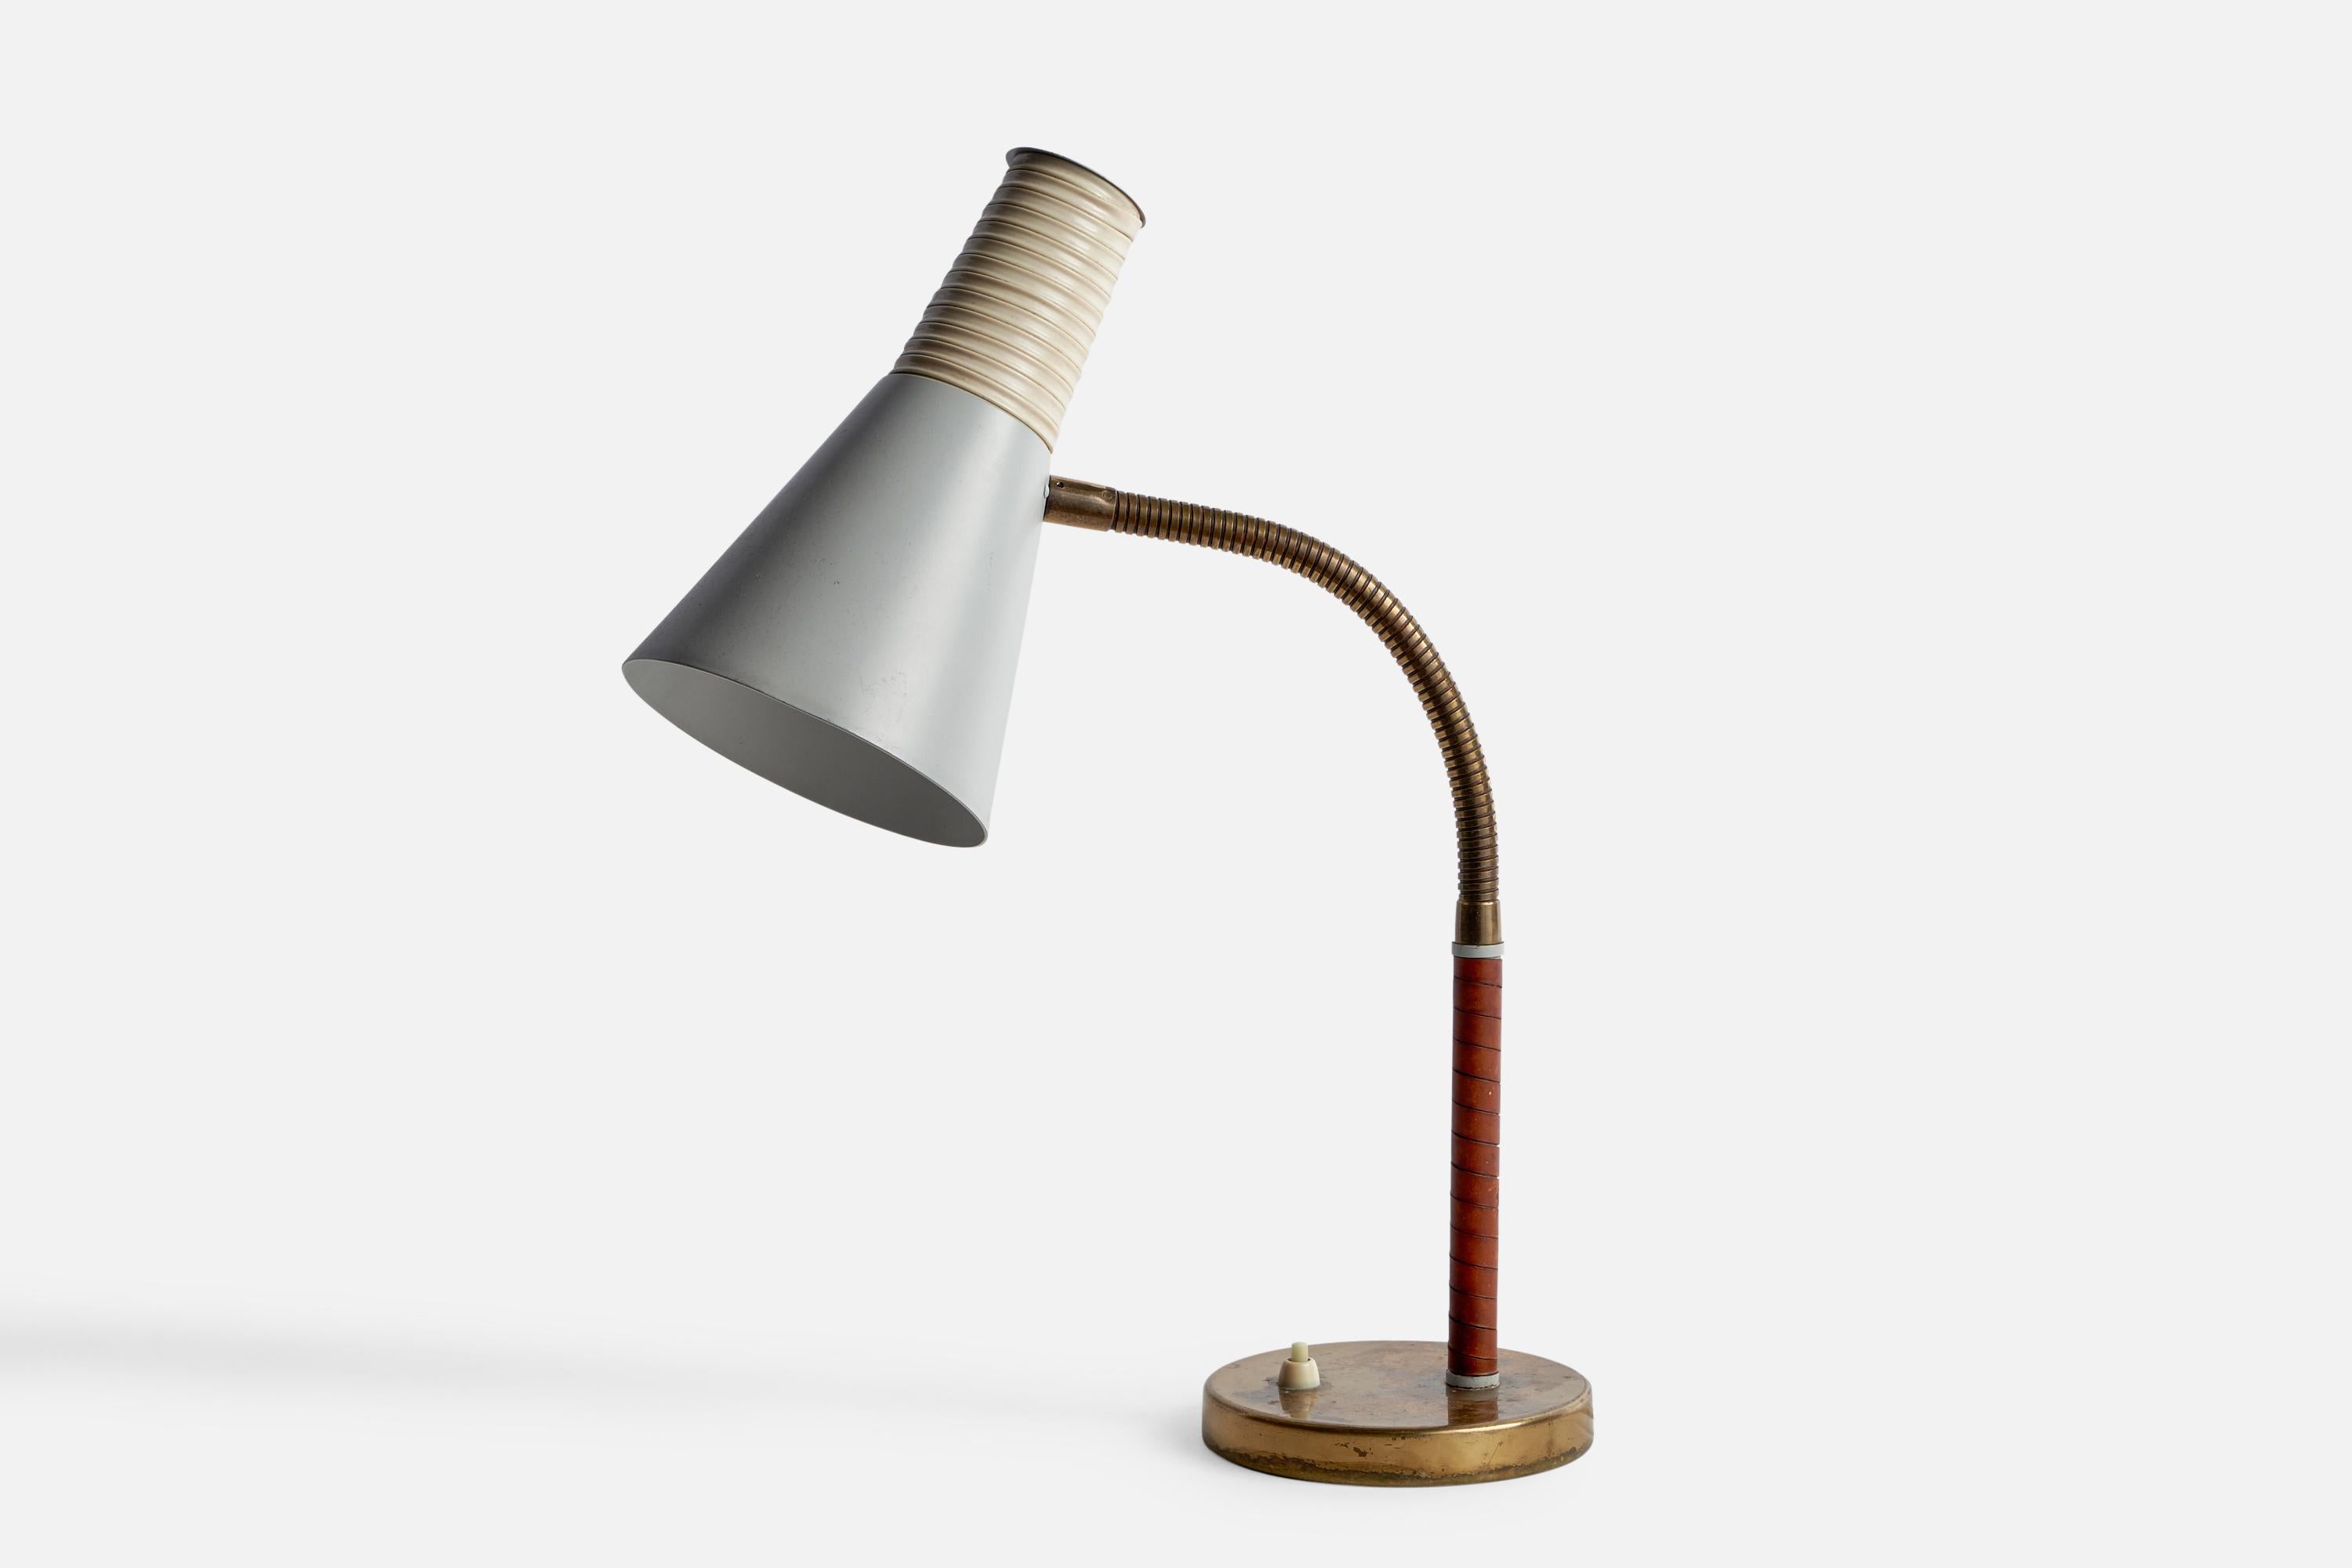 An adjustable brass, leather, white-lacquered metal and plastic band table lamp designed and produced by Itsu, Finland, 1950s.

Overall Dimensions (inches): 20.5” H x 5.5” W x 9.45” D
Bulb Specifications: E-26 Bulb
Number of Sockets: 1
All lighting